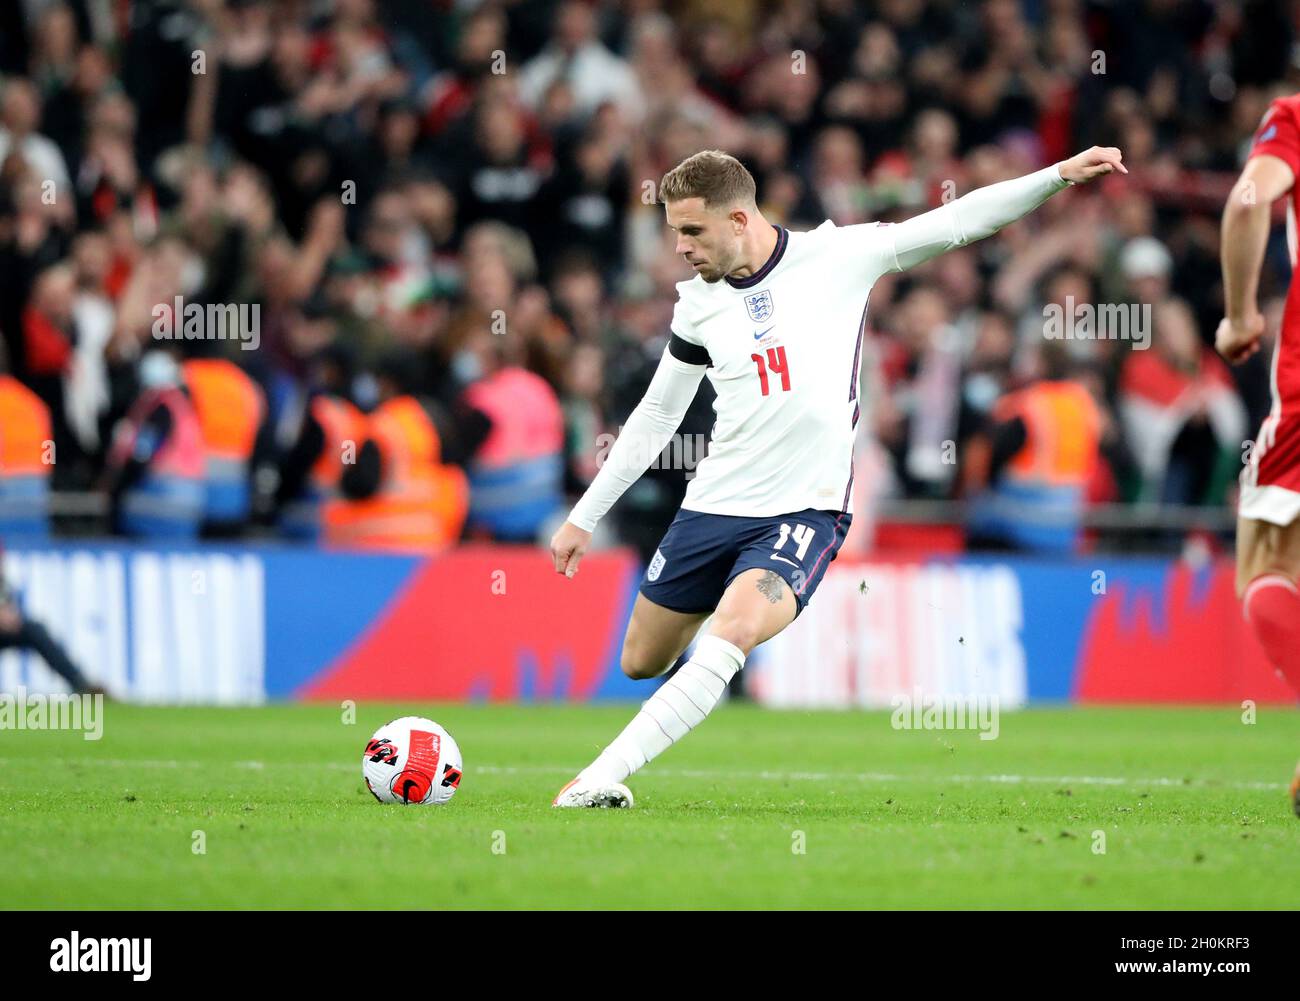 London, UK. 12th Oct, 2021. Jordan Henderson (England) at the England v Hungary World Cup Qualifier, at Wembley Stadium, London, UK on 12th October, 2021. Credit: Paul Marriott/Alamy Live News Stock Photo